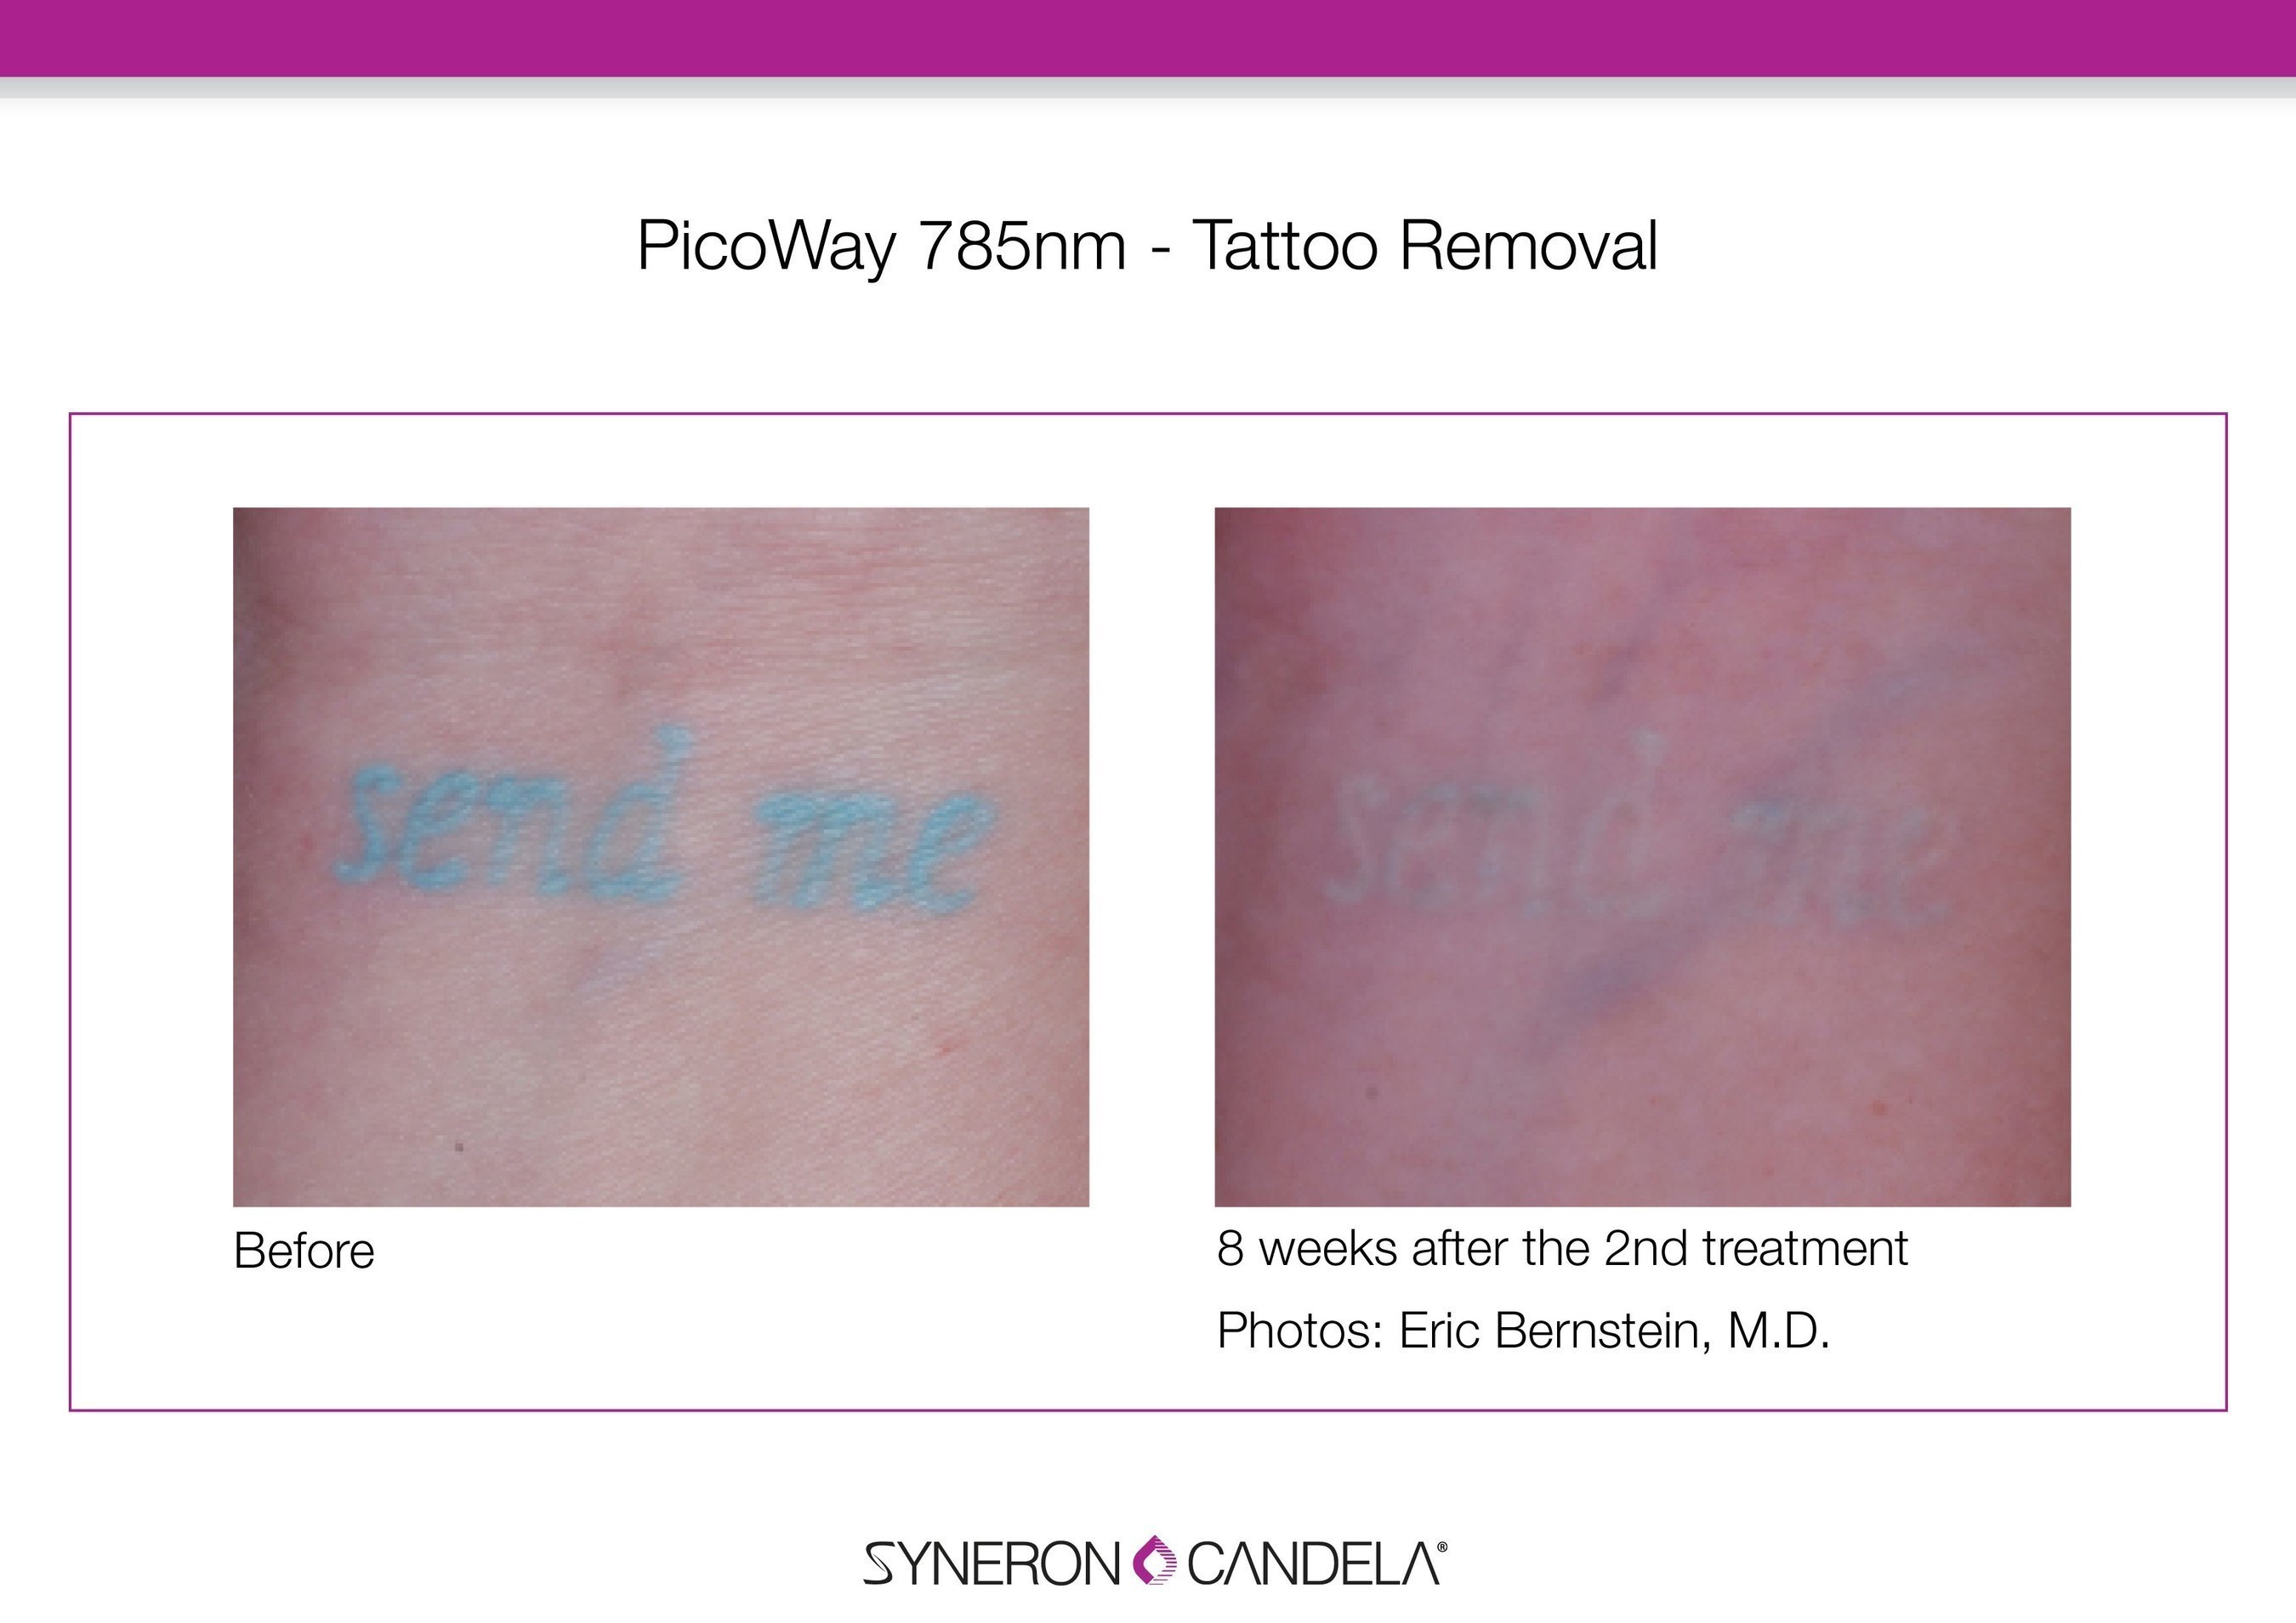 The PicoWay easily removed the green, hard to treat, tattoo ink in just two treatments, providing faster and better results than traditional tattoo removal lasers.